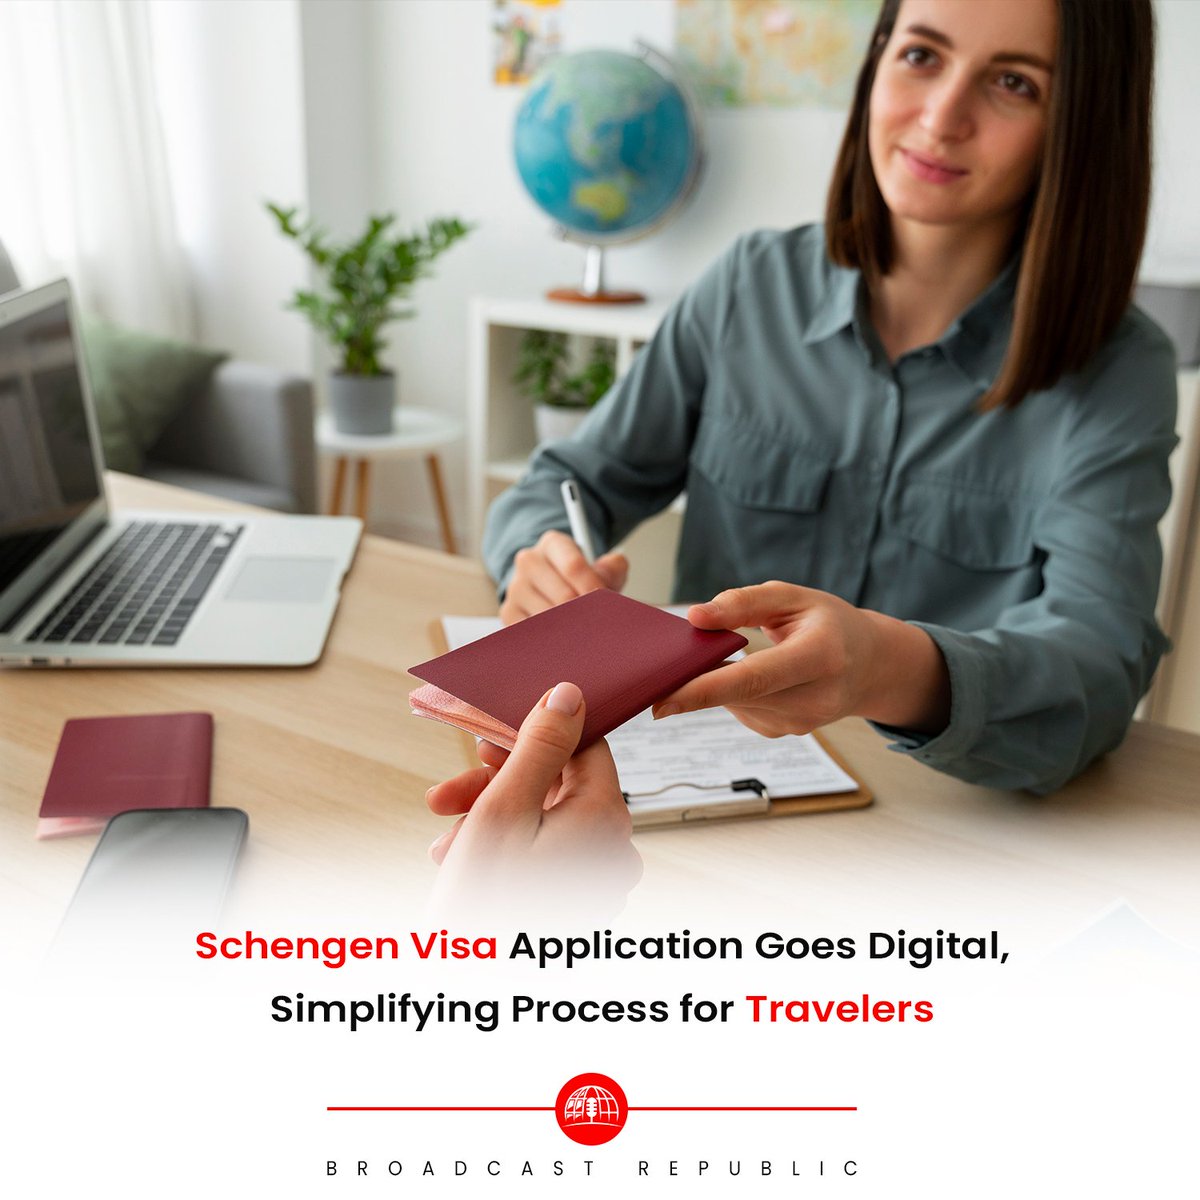 The European Travel Commission's Chief Operating Officer, Teodora Marinska, announced plans to digitalize the Schengen visa application process, making it easier and more efficient. #BroadcastRepublic #SchengenVisa #Digitalization #VisaApplication